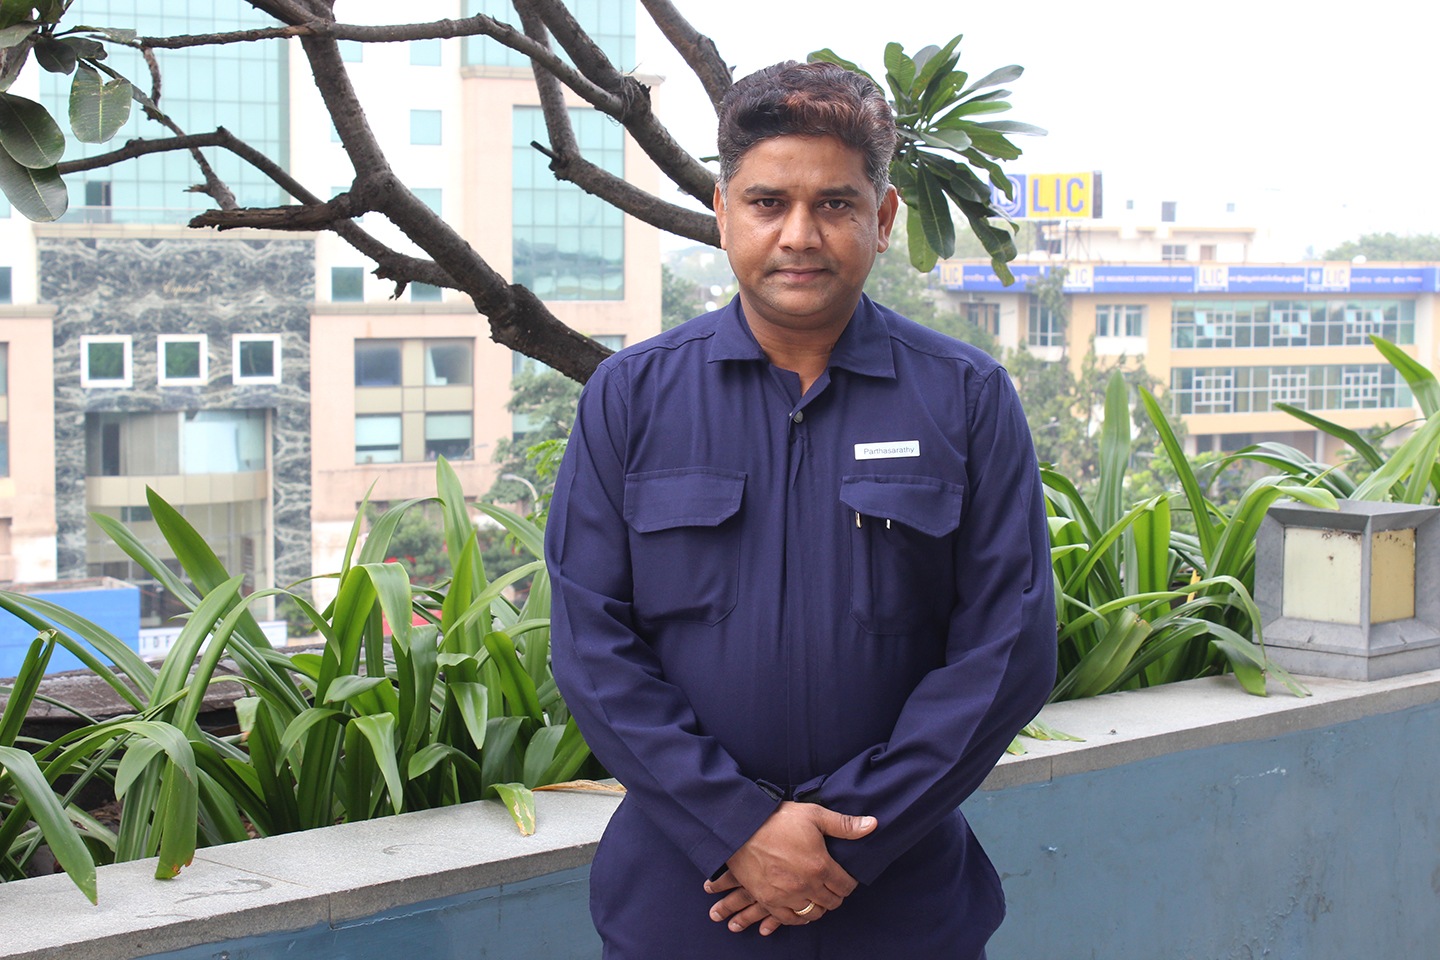 Hyatt Regency Chennai appoints Parthasarathy G.S. as the new Engineering Manager